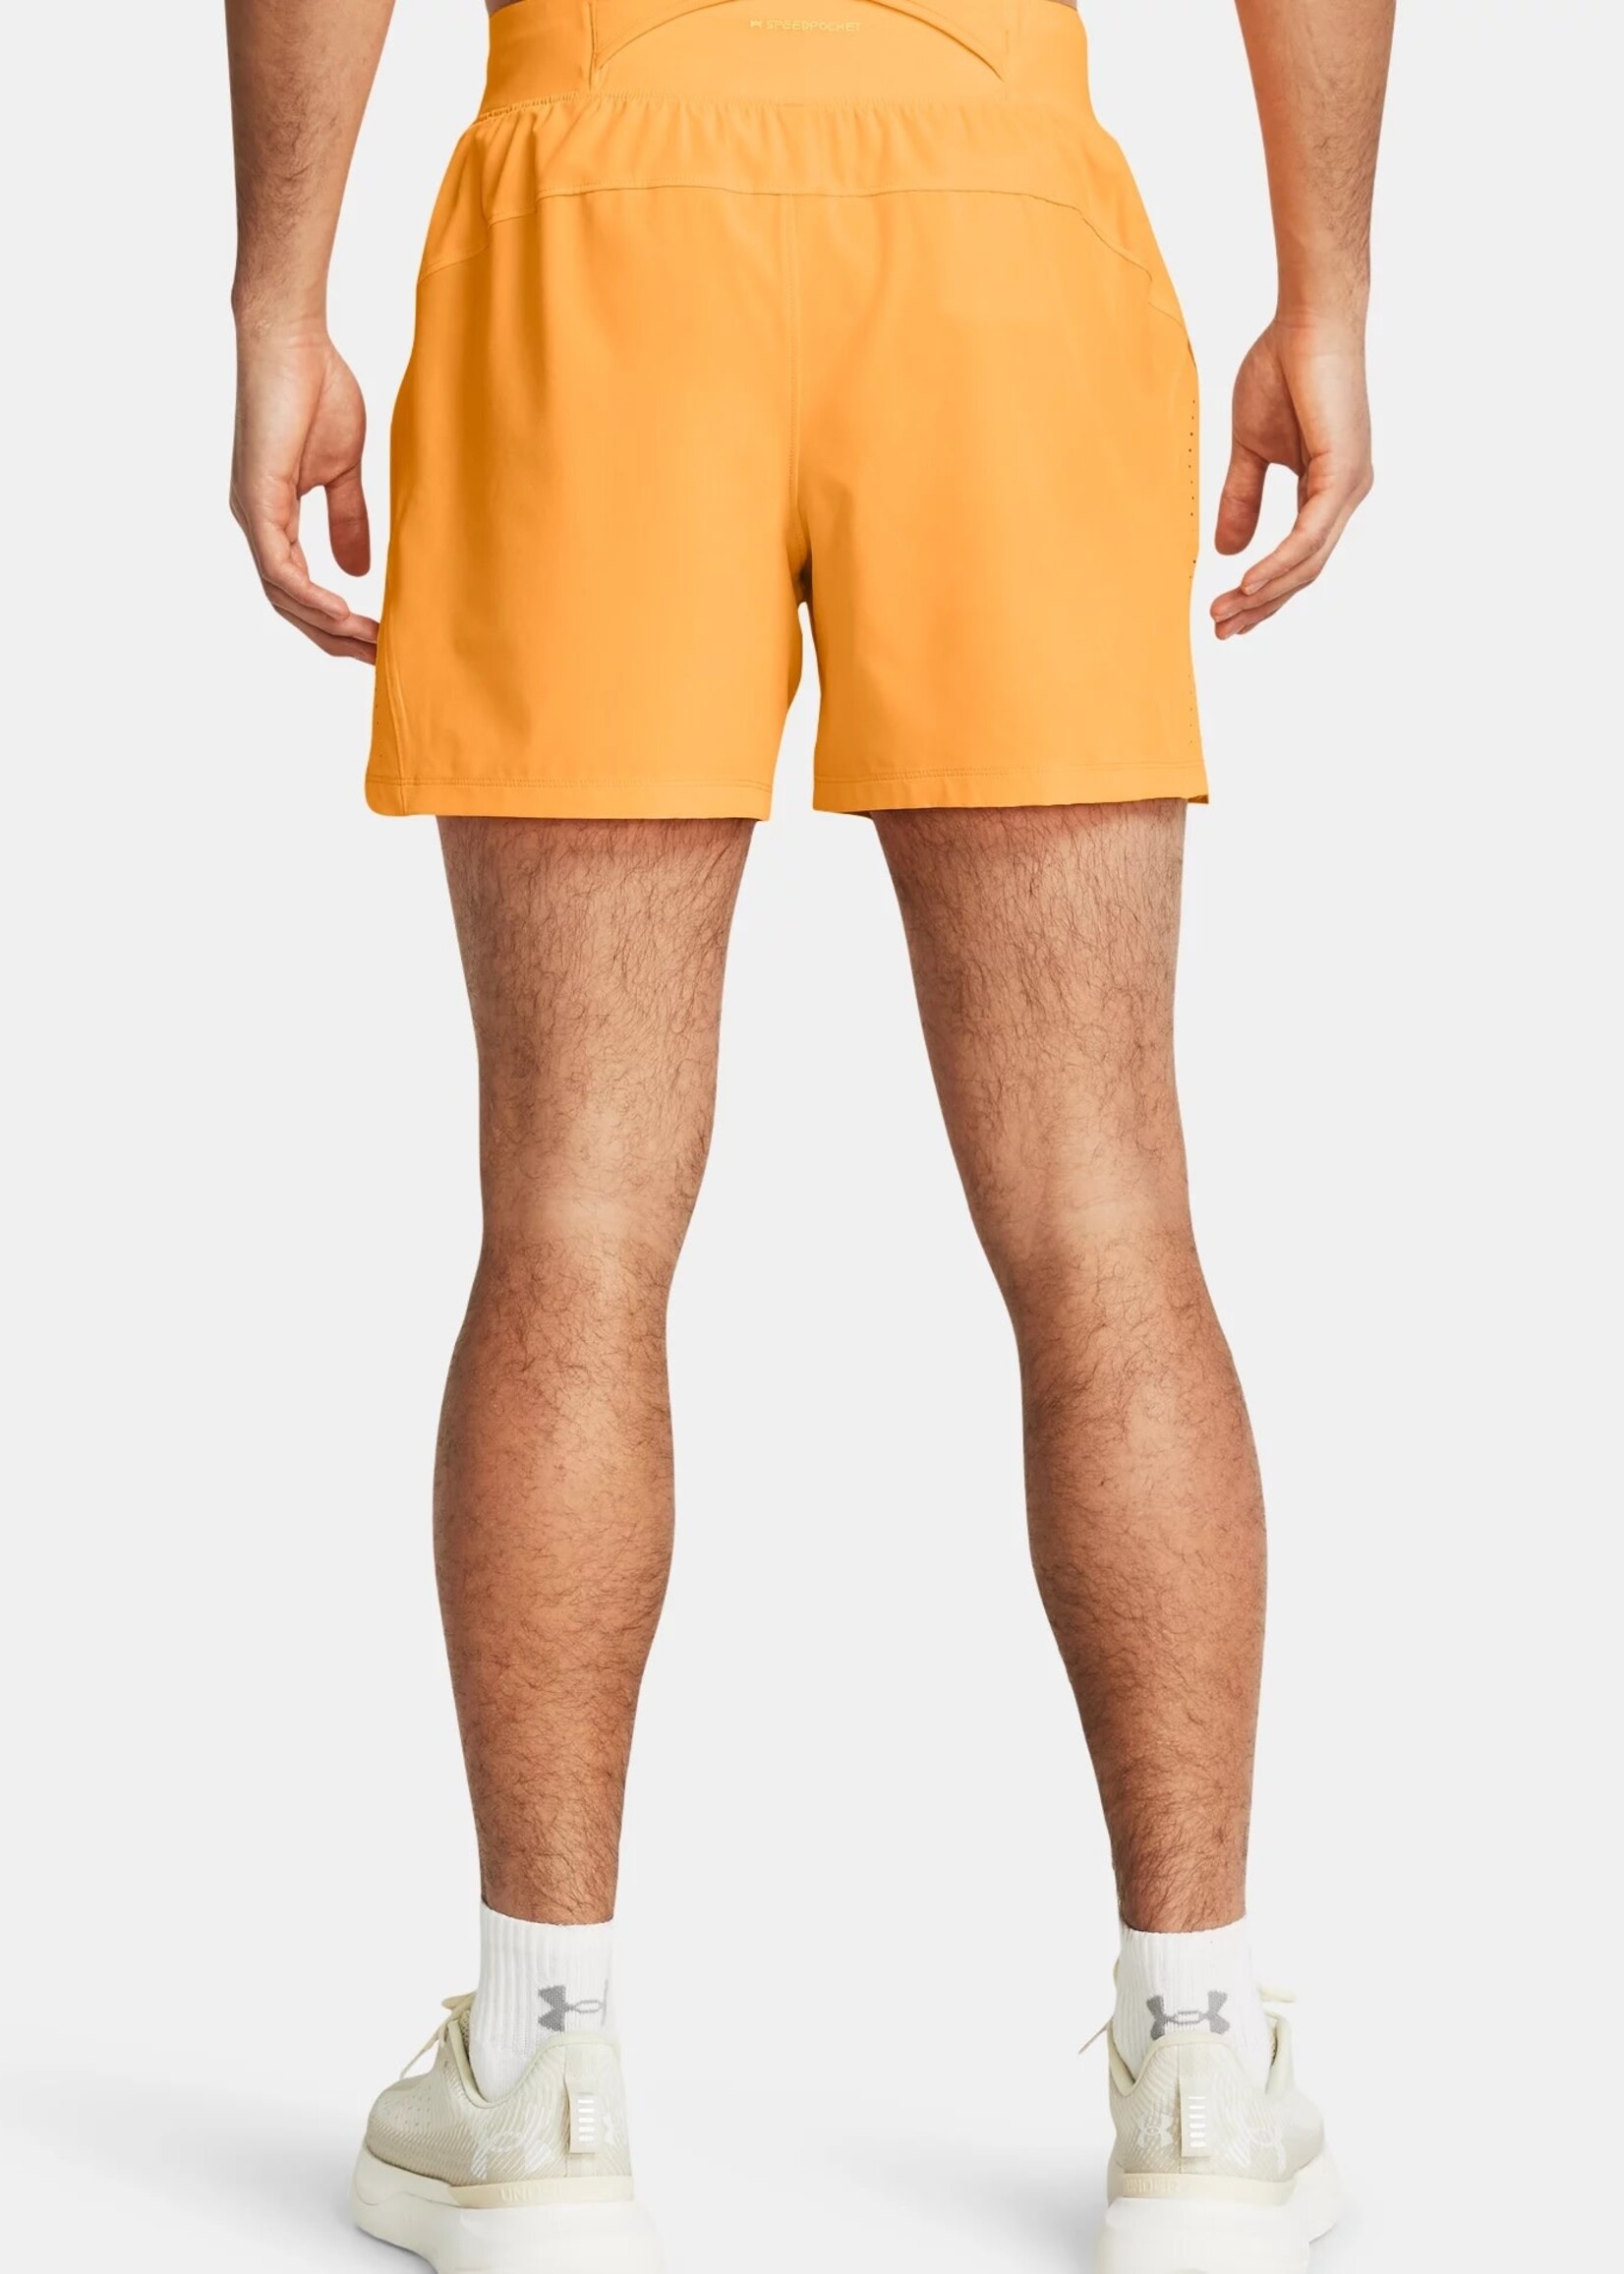 Under Armour UA Launch Pro 5'' Shorts-ORG